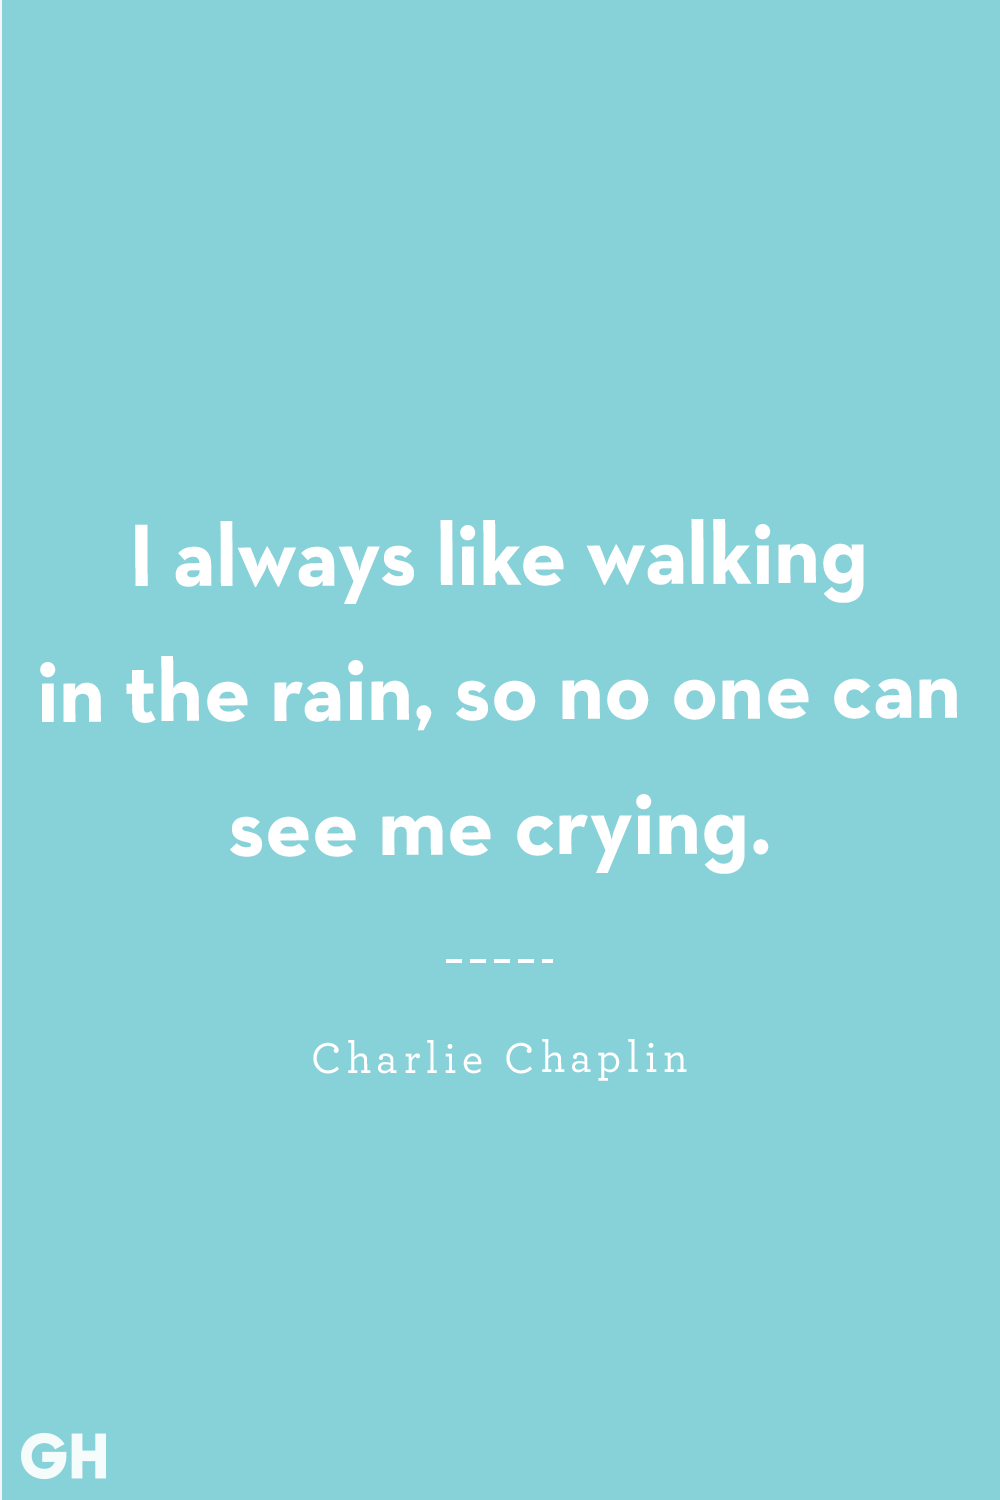 crying tears of sadness quotes